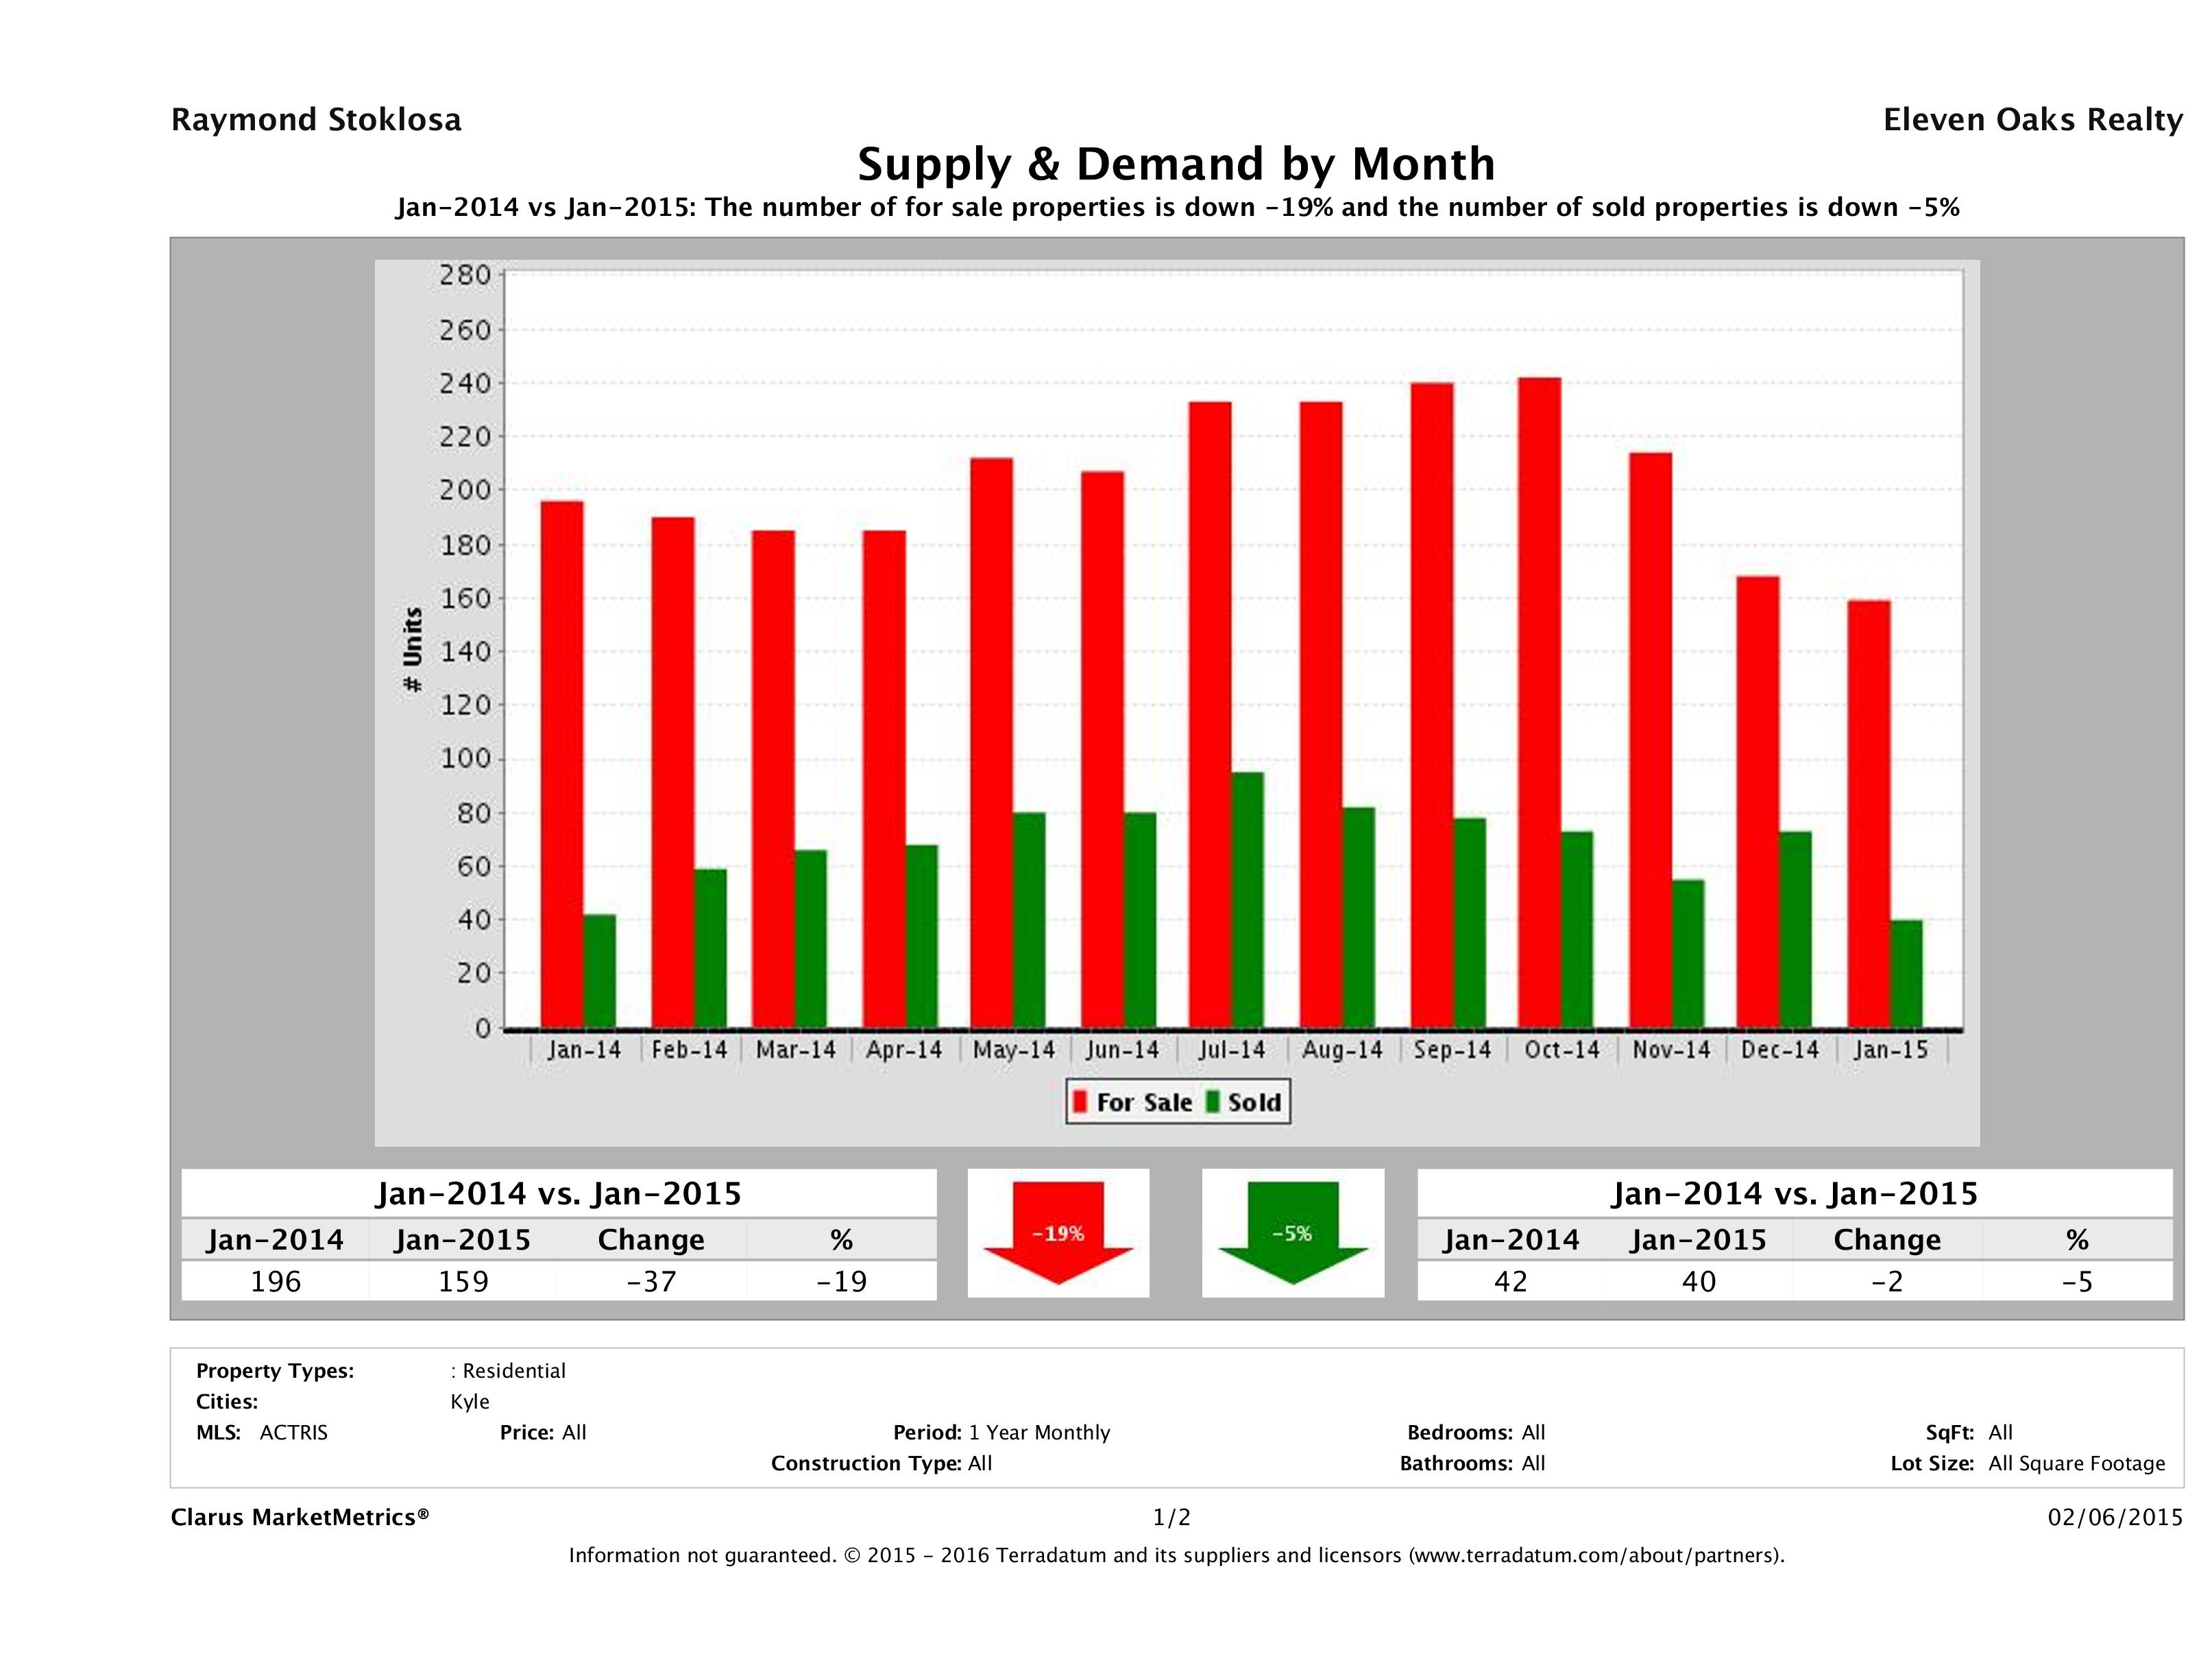 Kyle real estate market supply and demand January 2015